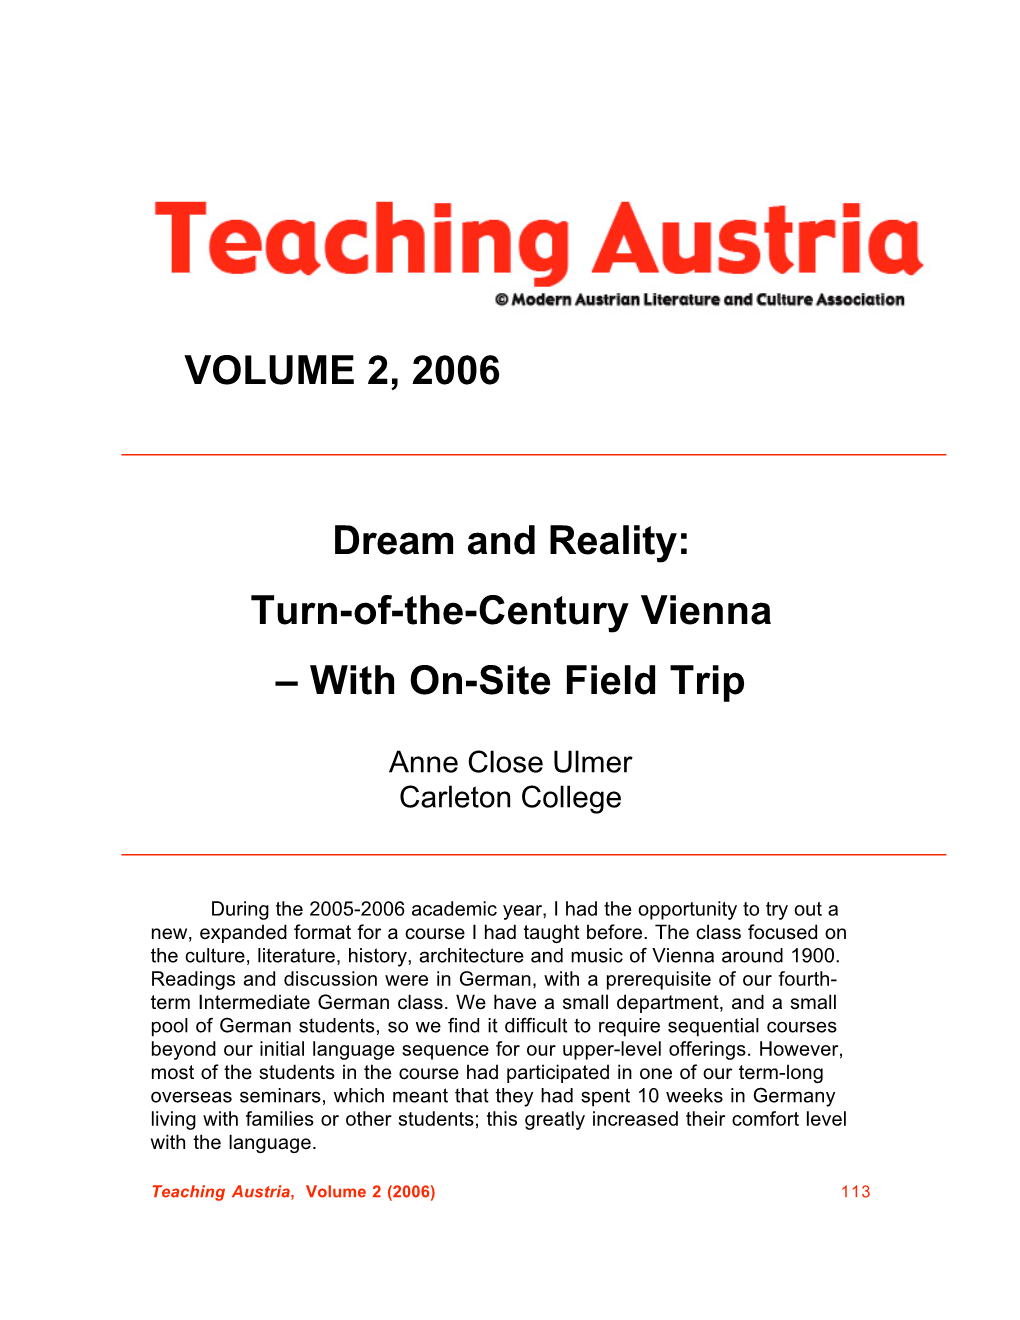 VOLUME 2, 2006 Dream and Reality: Turn